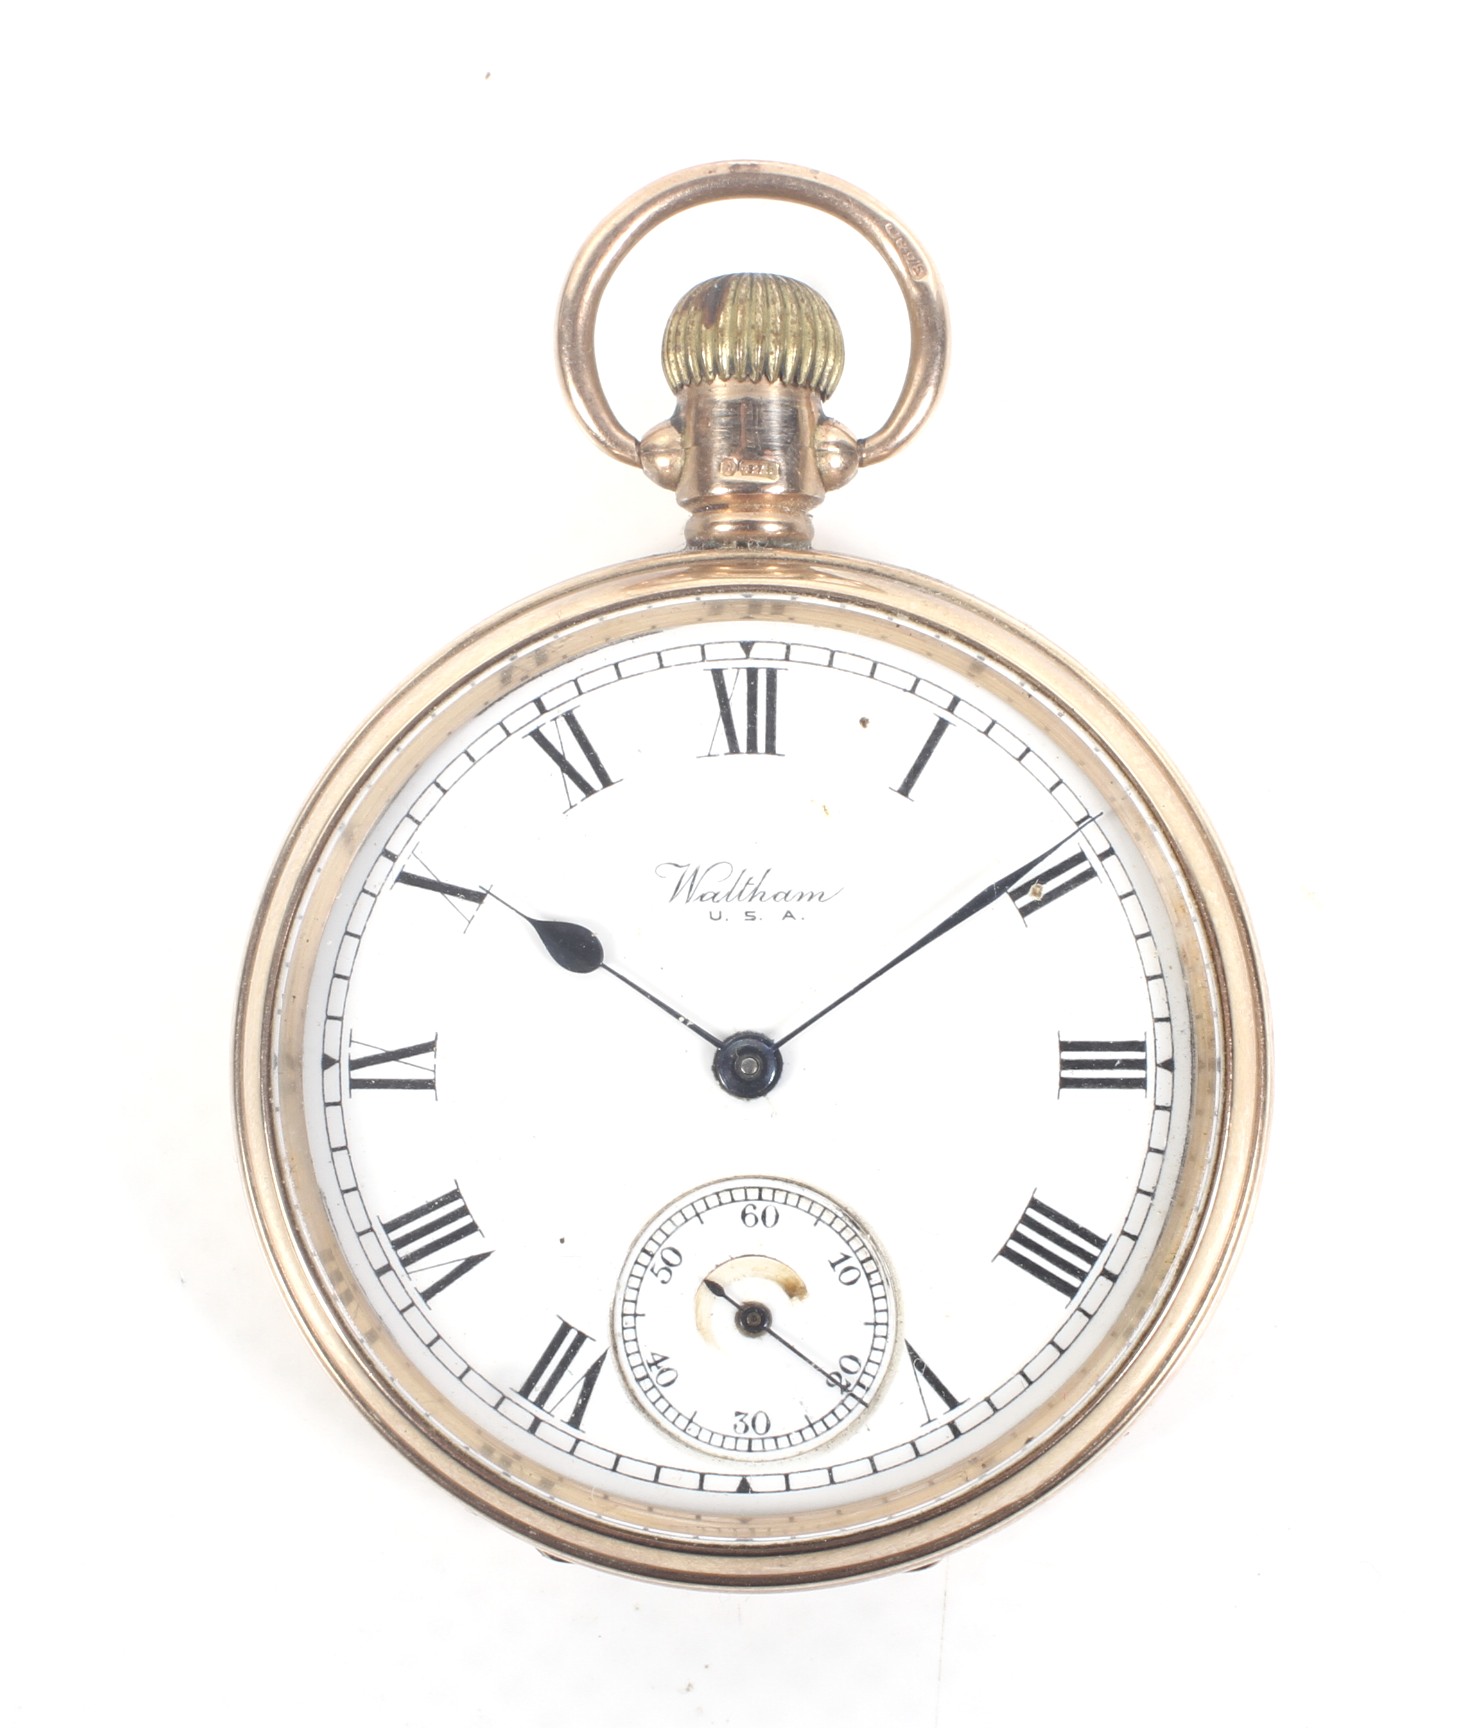 Waltham U.S.A, an early 20th century 9ct rose gold cased open-face keyless pocket watch.